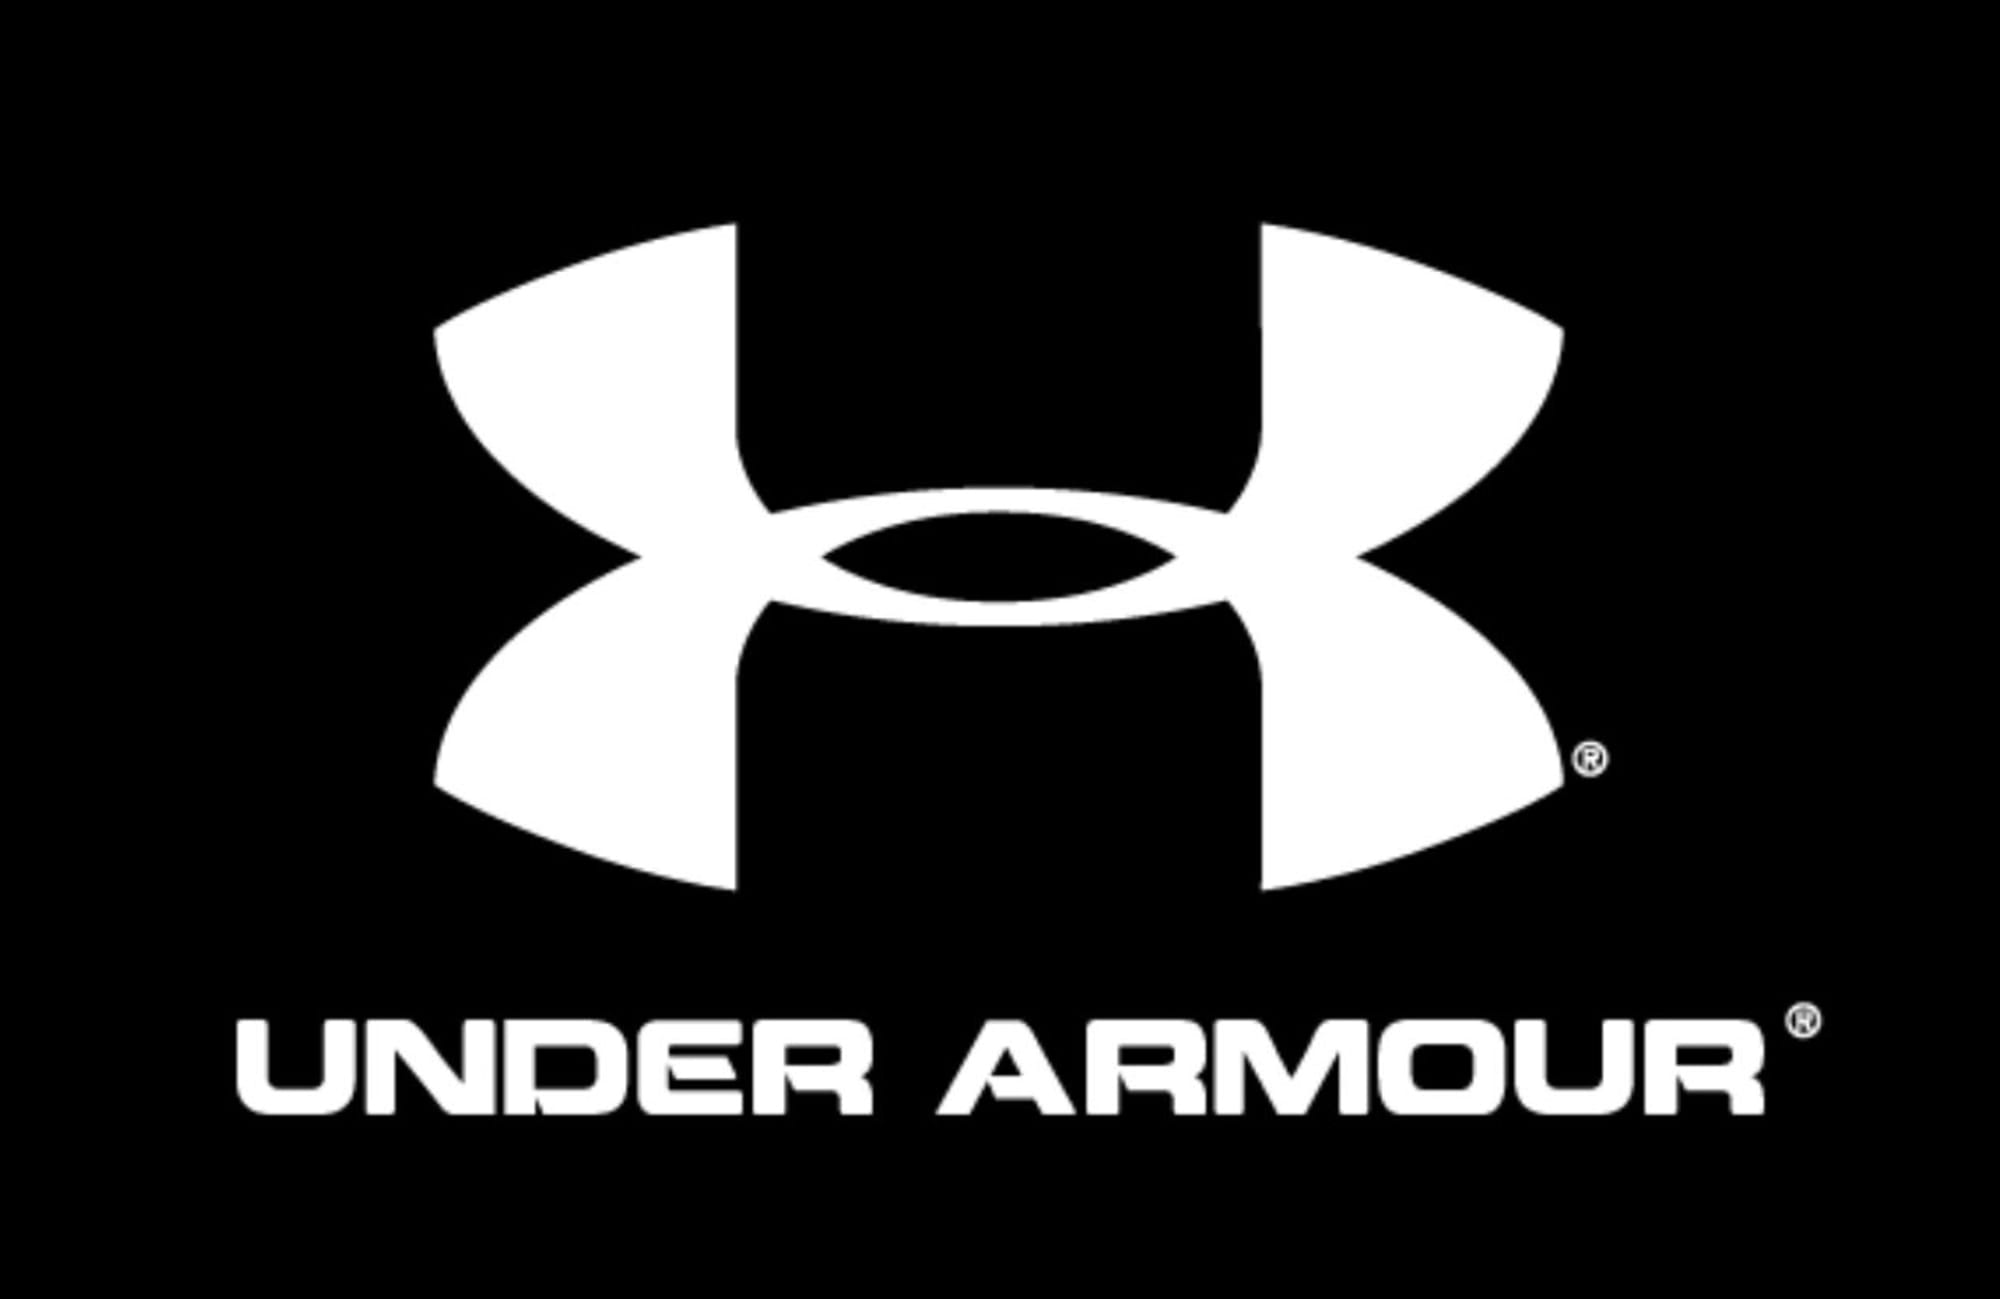 under armor outlet shoes